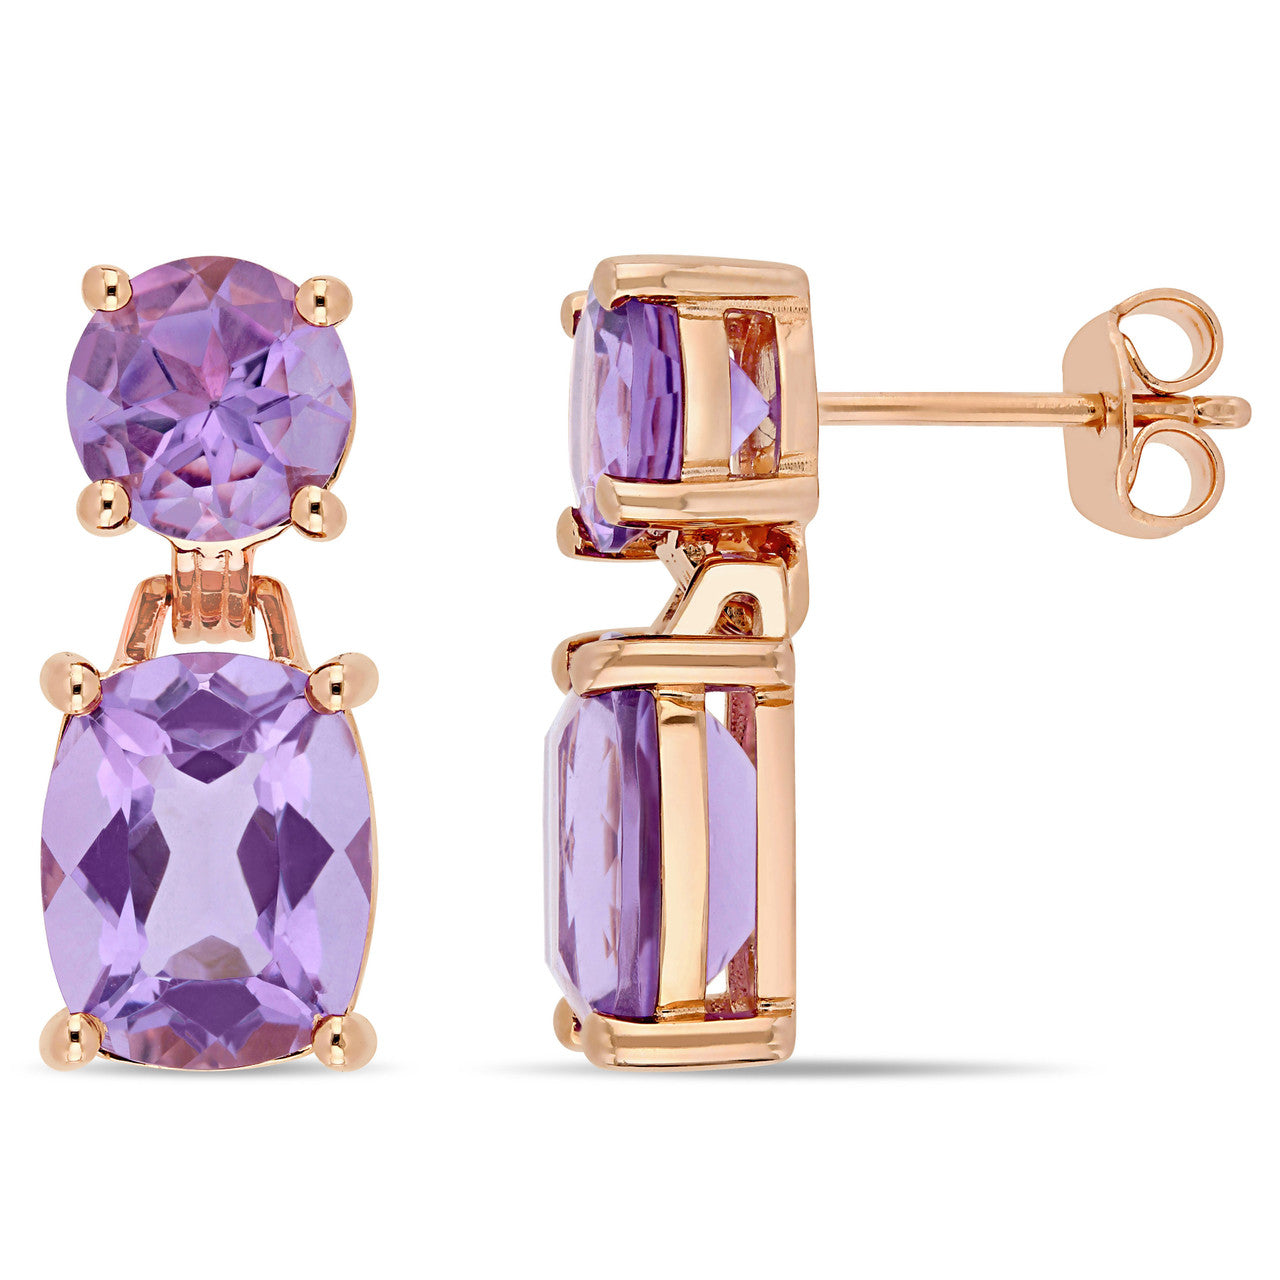 Ice Jewellery 8 CT TGW Round & Cushion Cut Amethyst Dangle Earrings In Rose Gold Plated Sterling Silver - 75000004334 | Ice Jewellery Australia